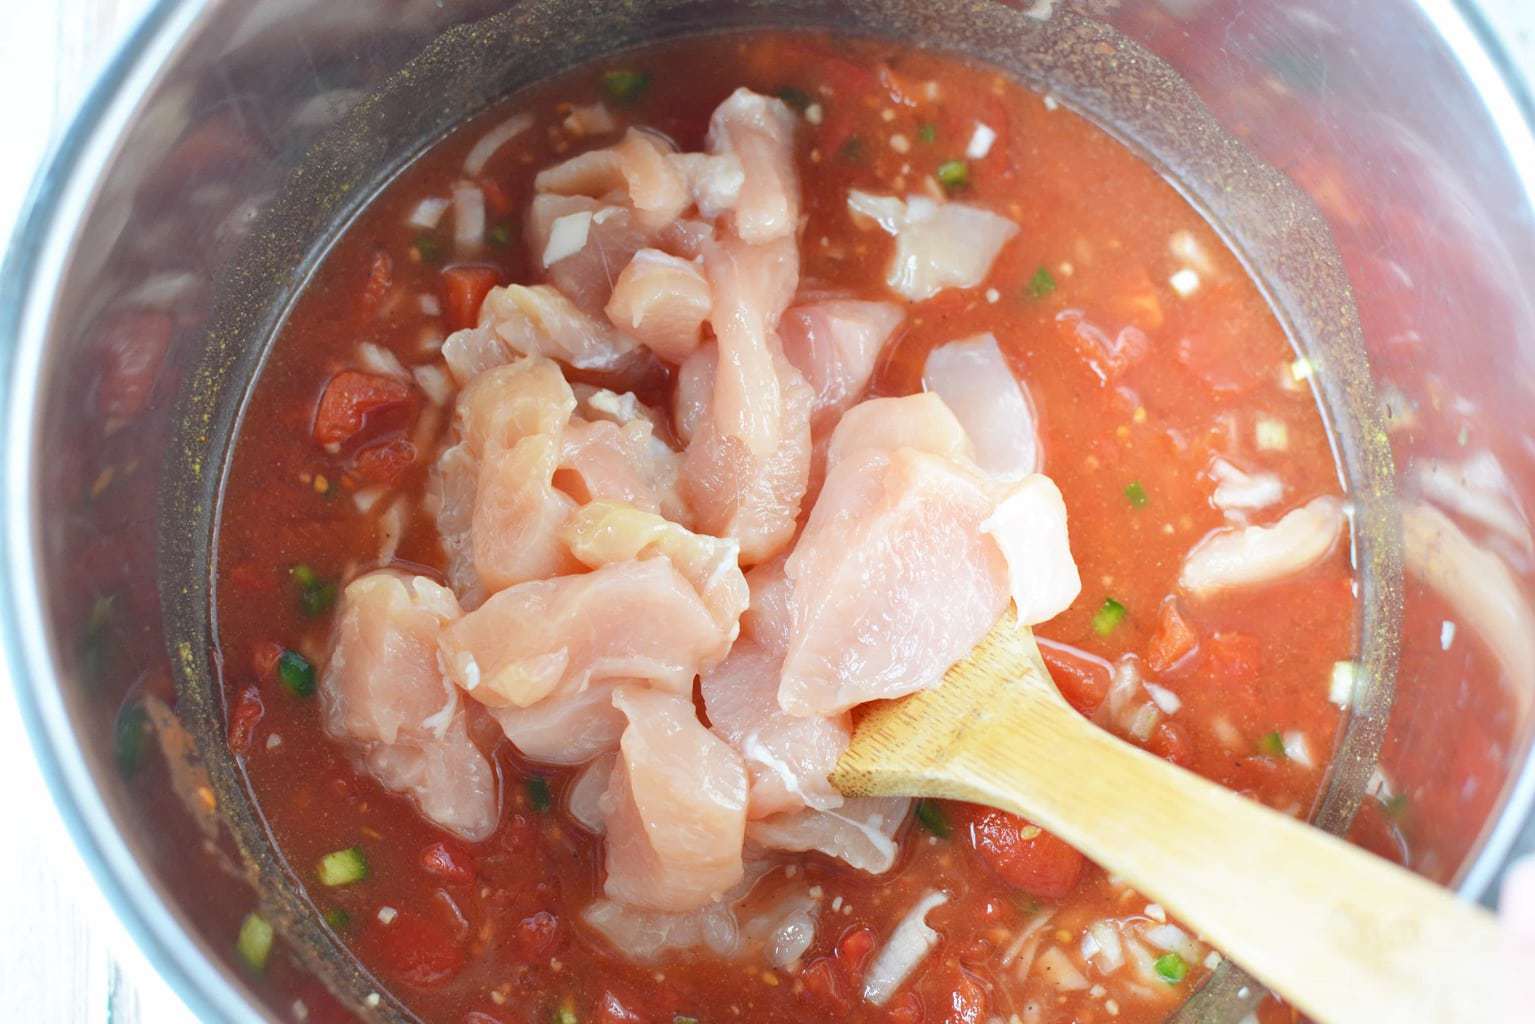 stirring in raw chicken pieces to soup in pot